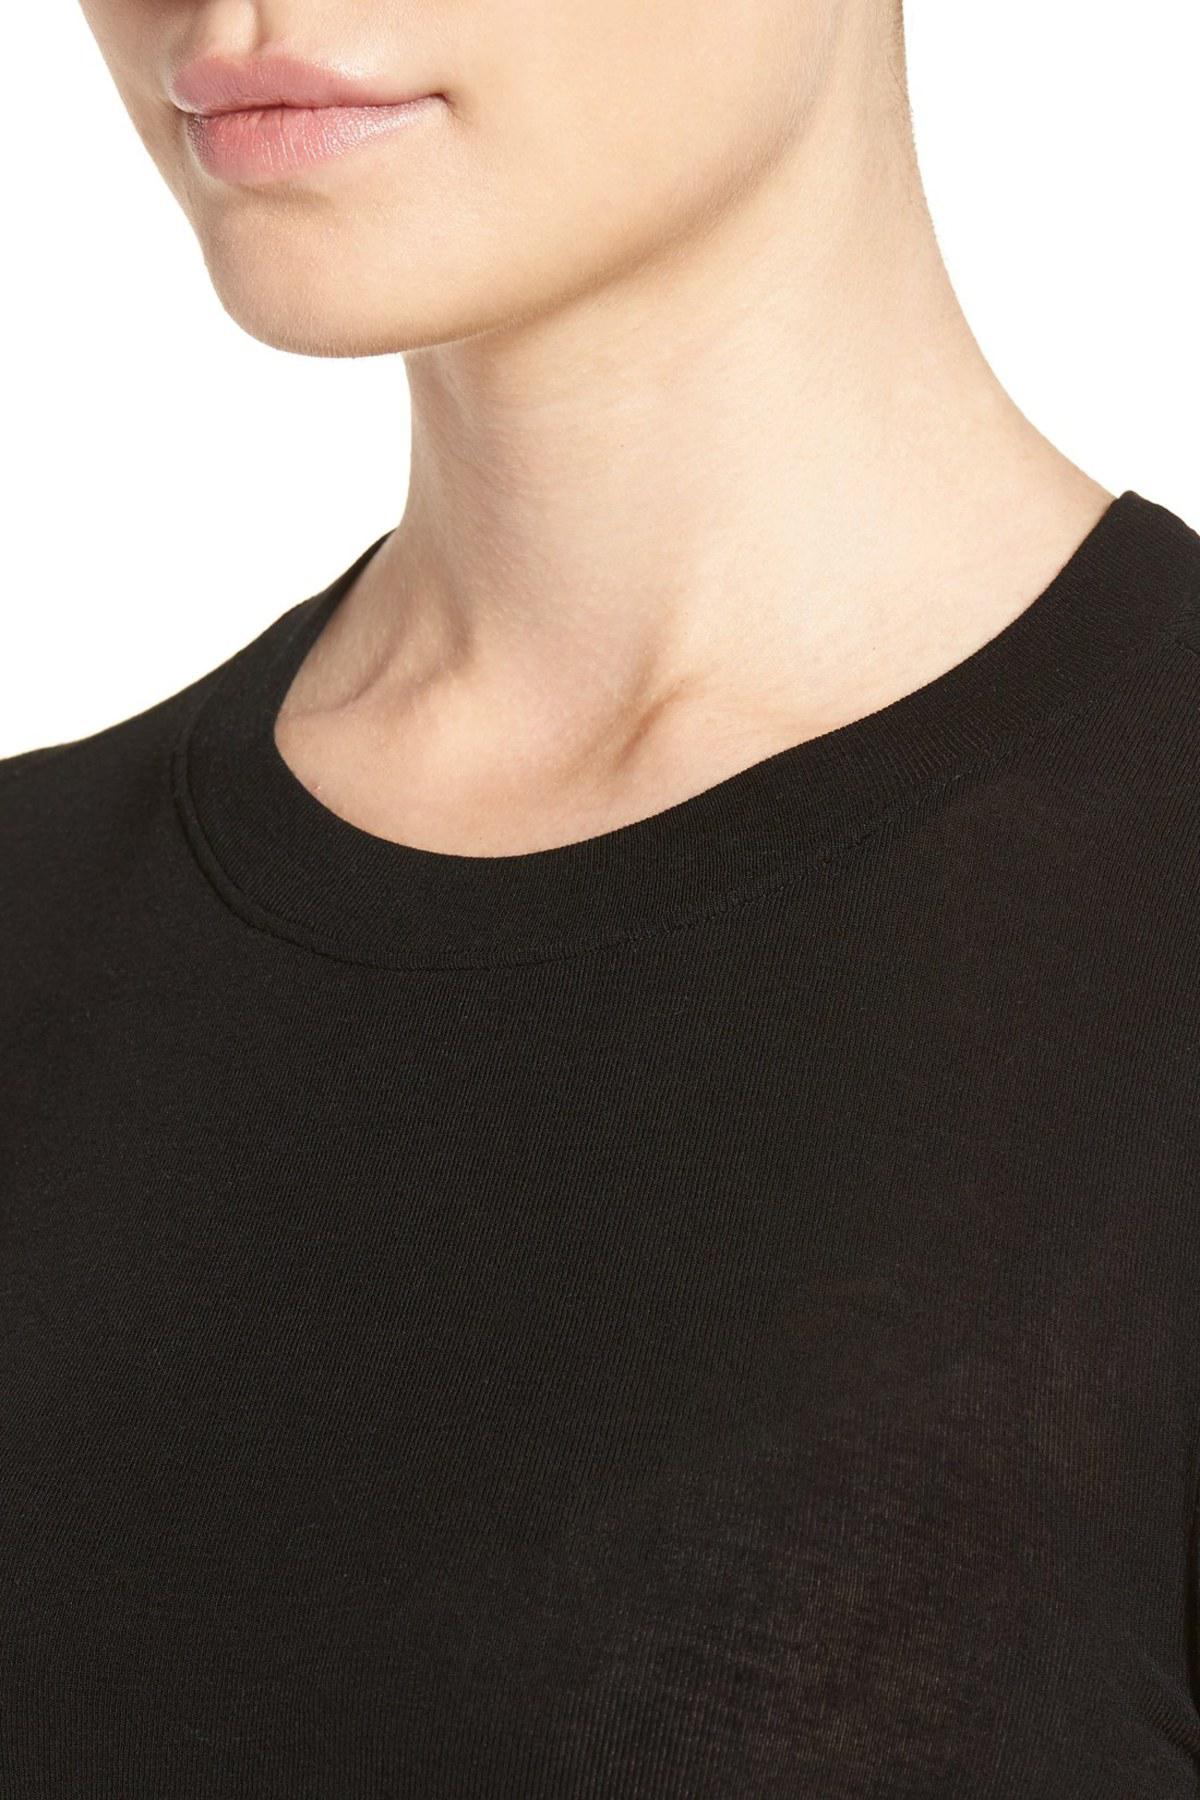 Trouve Layering Tee, $20, Nordstrom